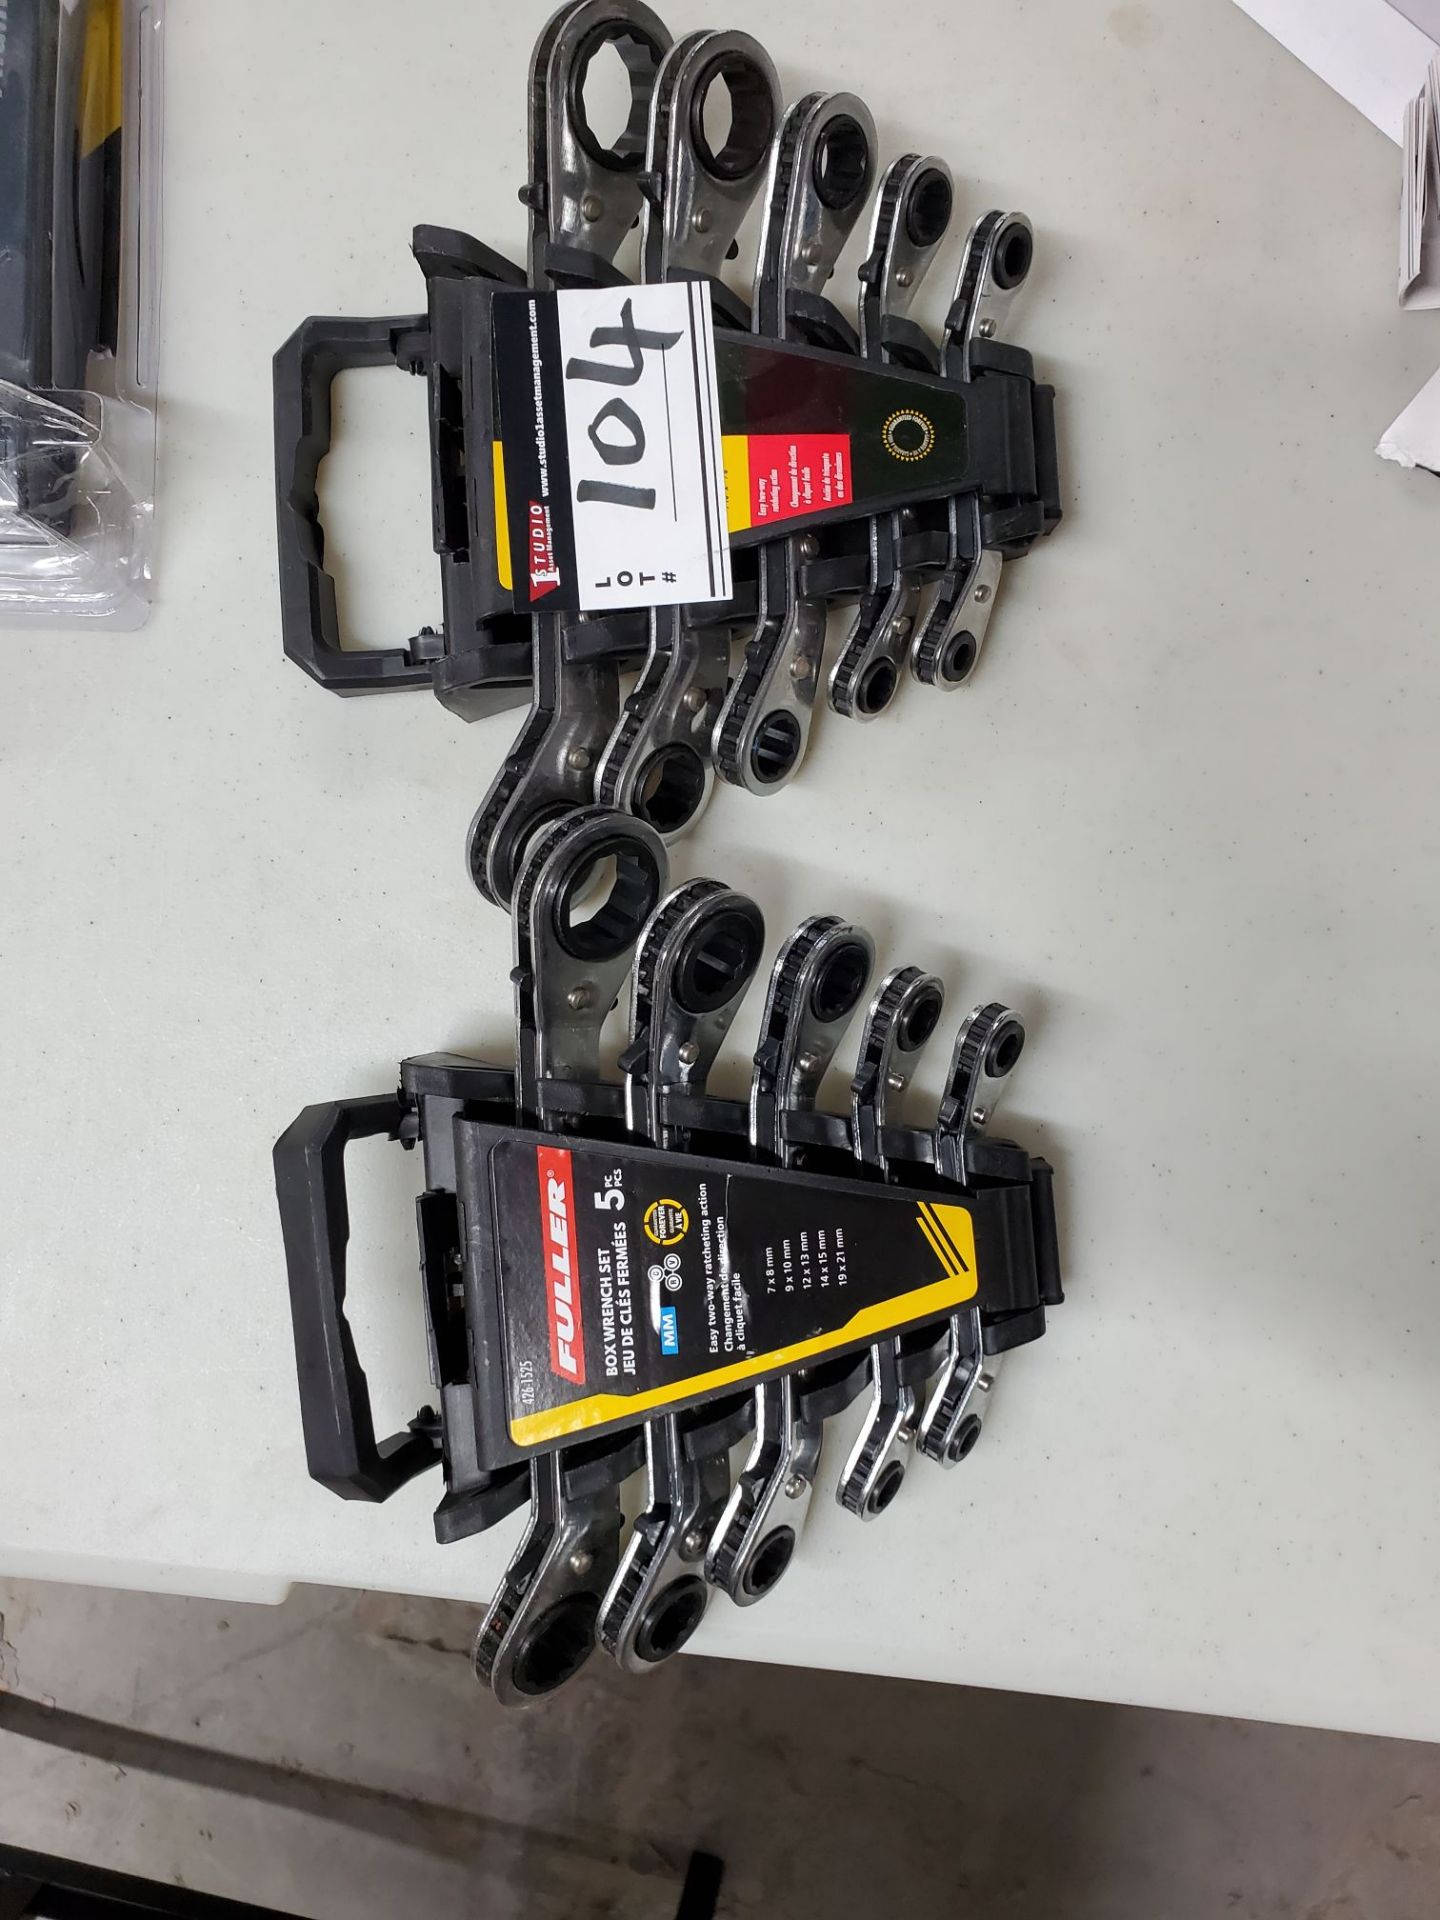 LOT/WRENCH SET, 5PC FULLER BOX WRENCH SET, QTY2 (NEW)